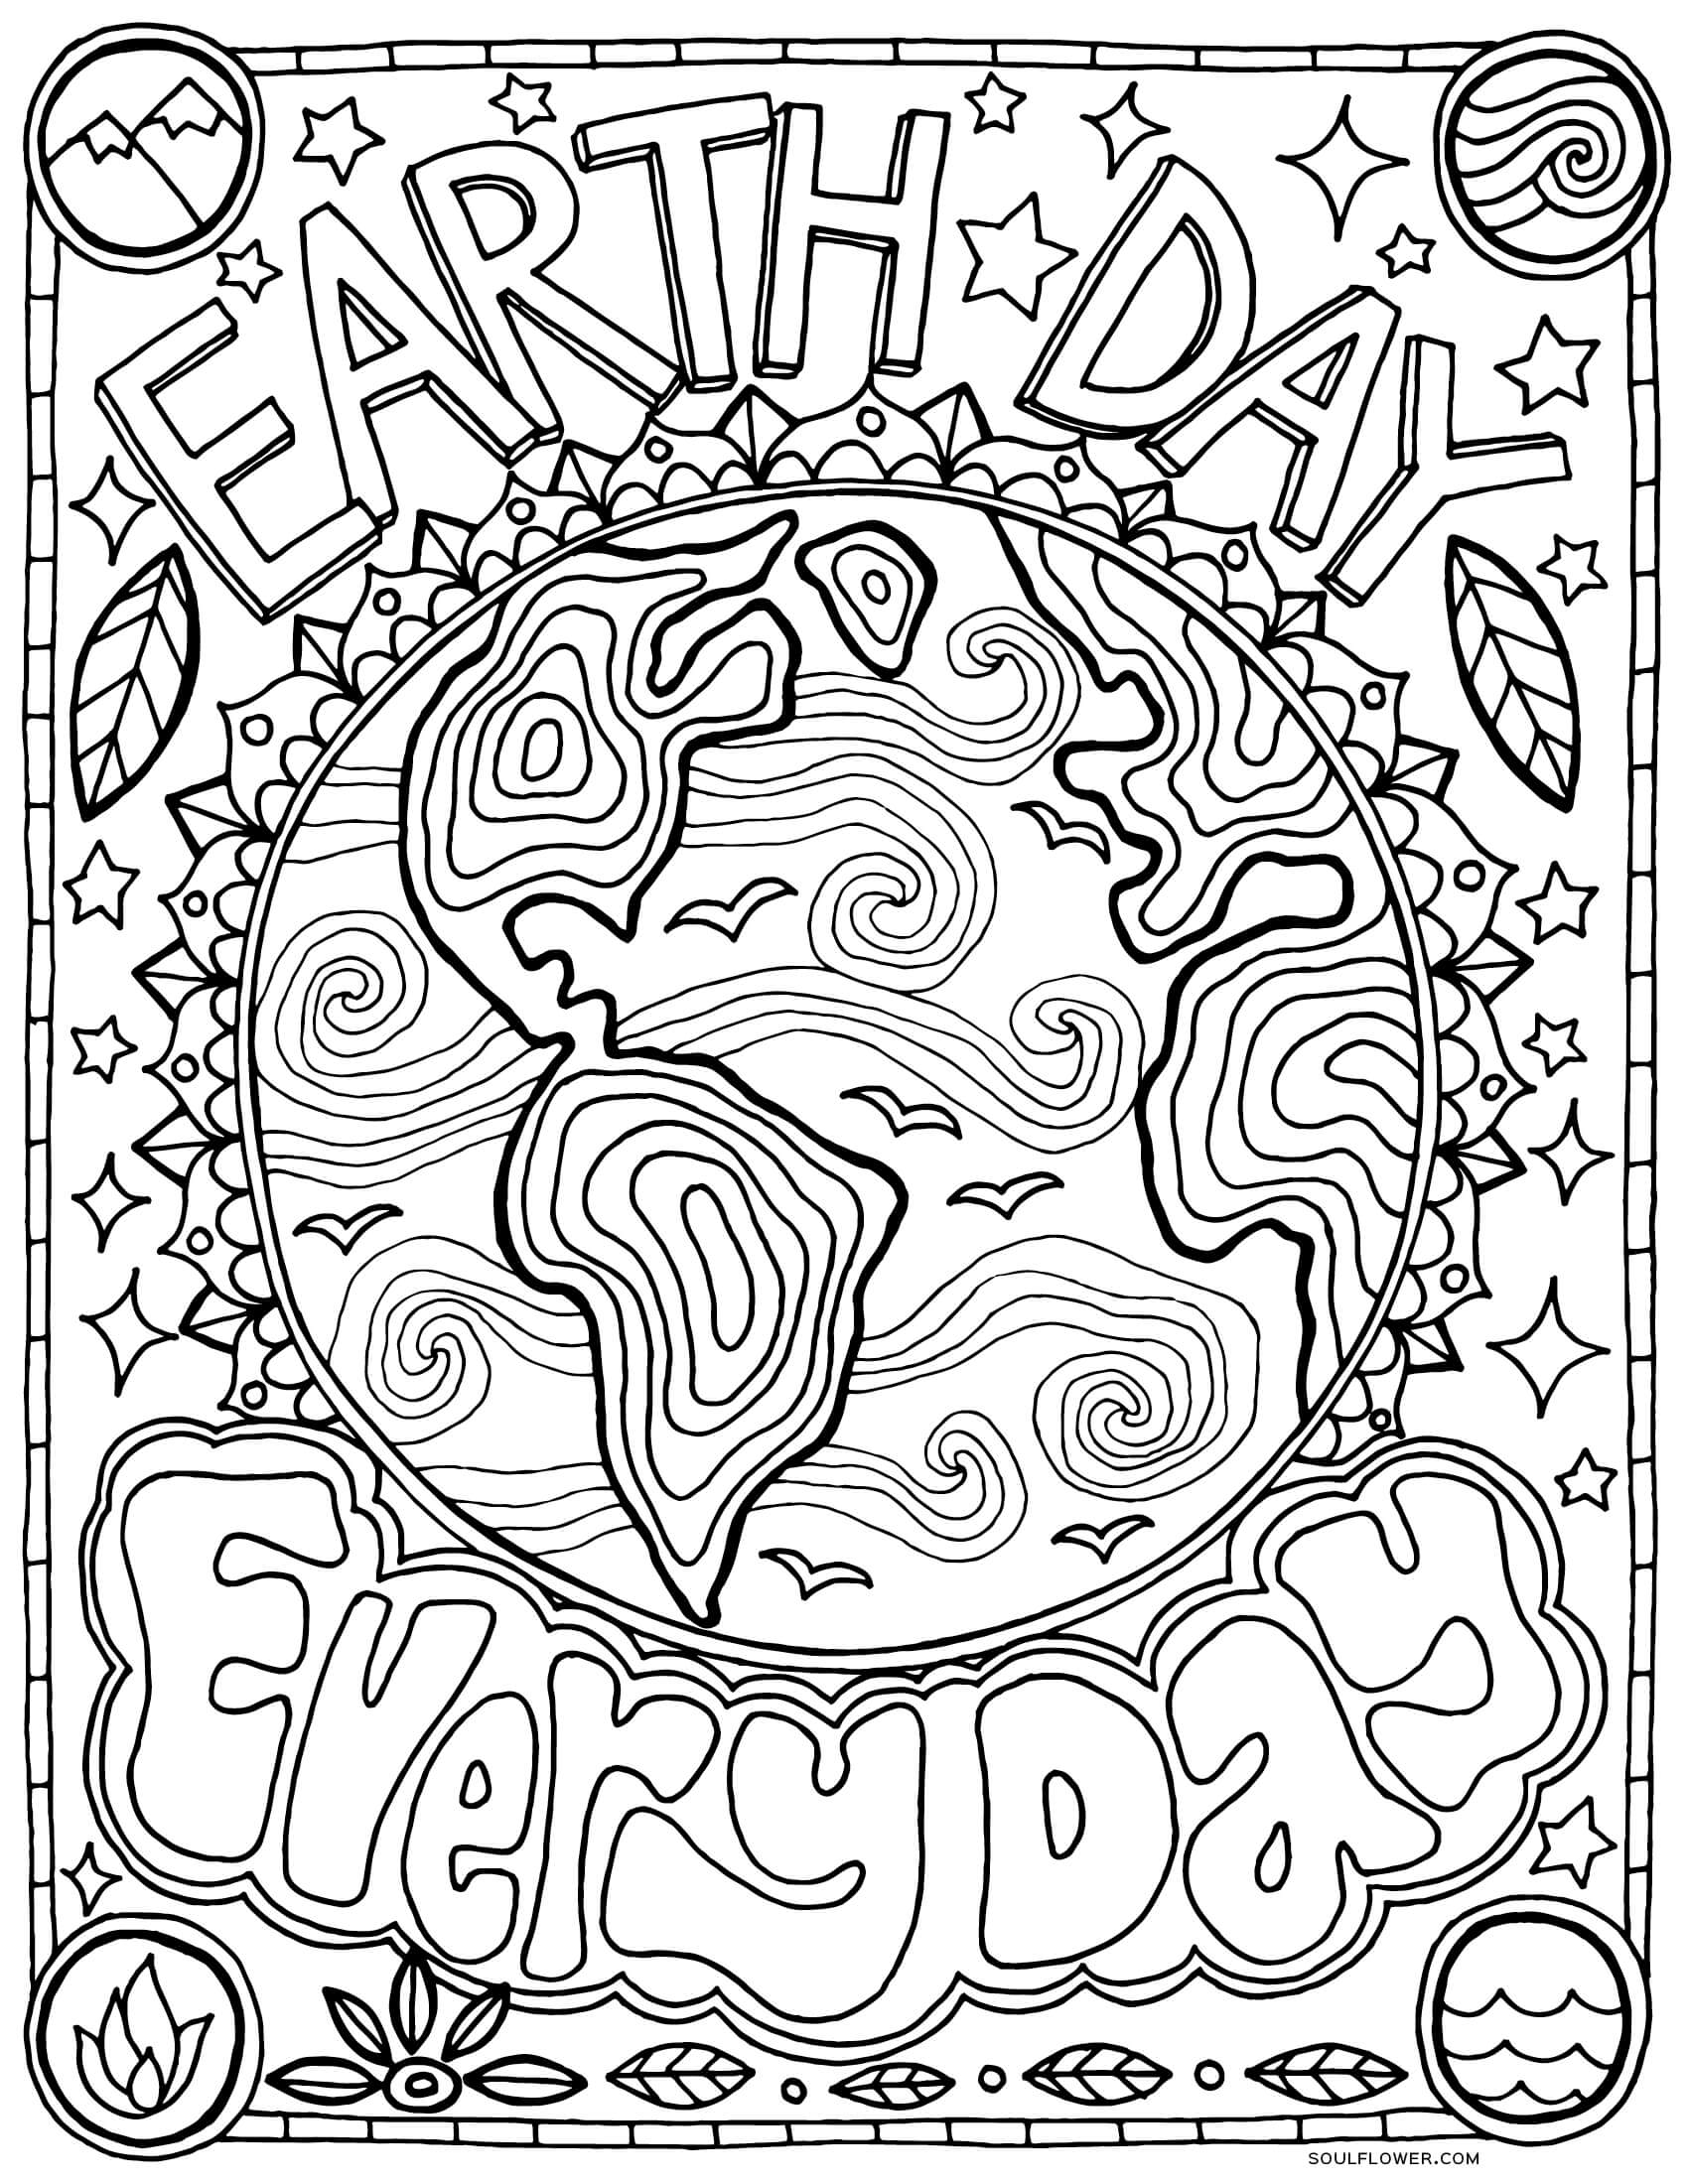 printable-earth-day-coloring-pages